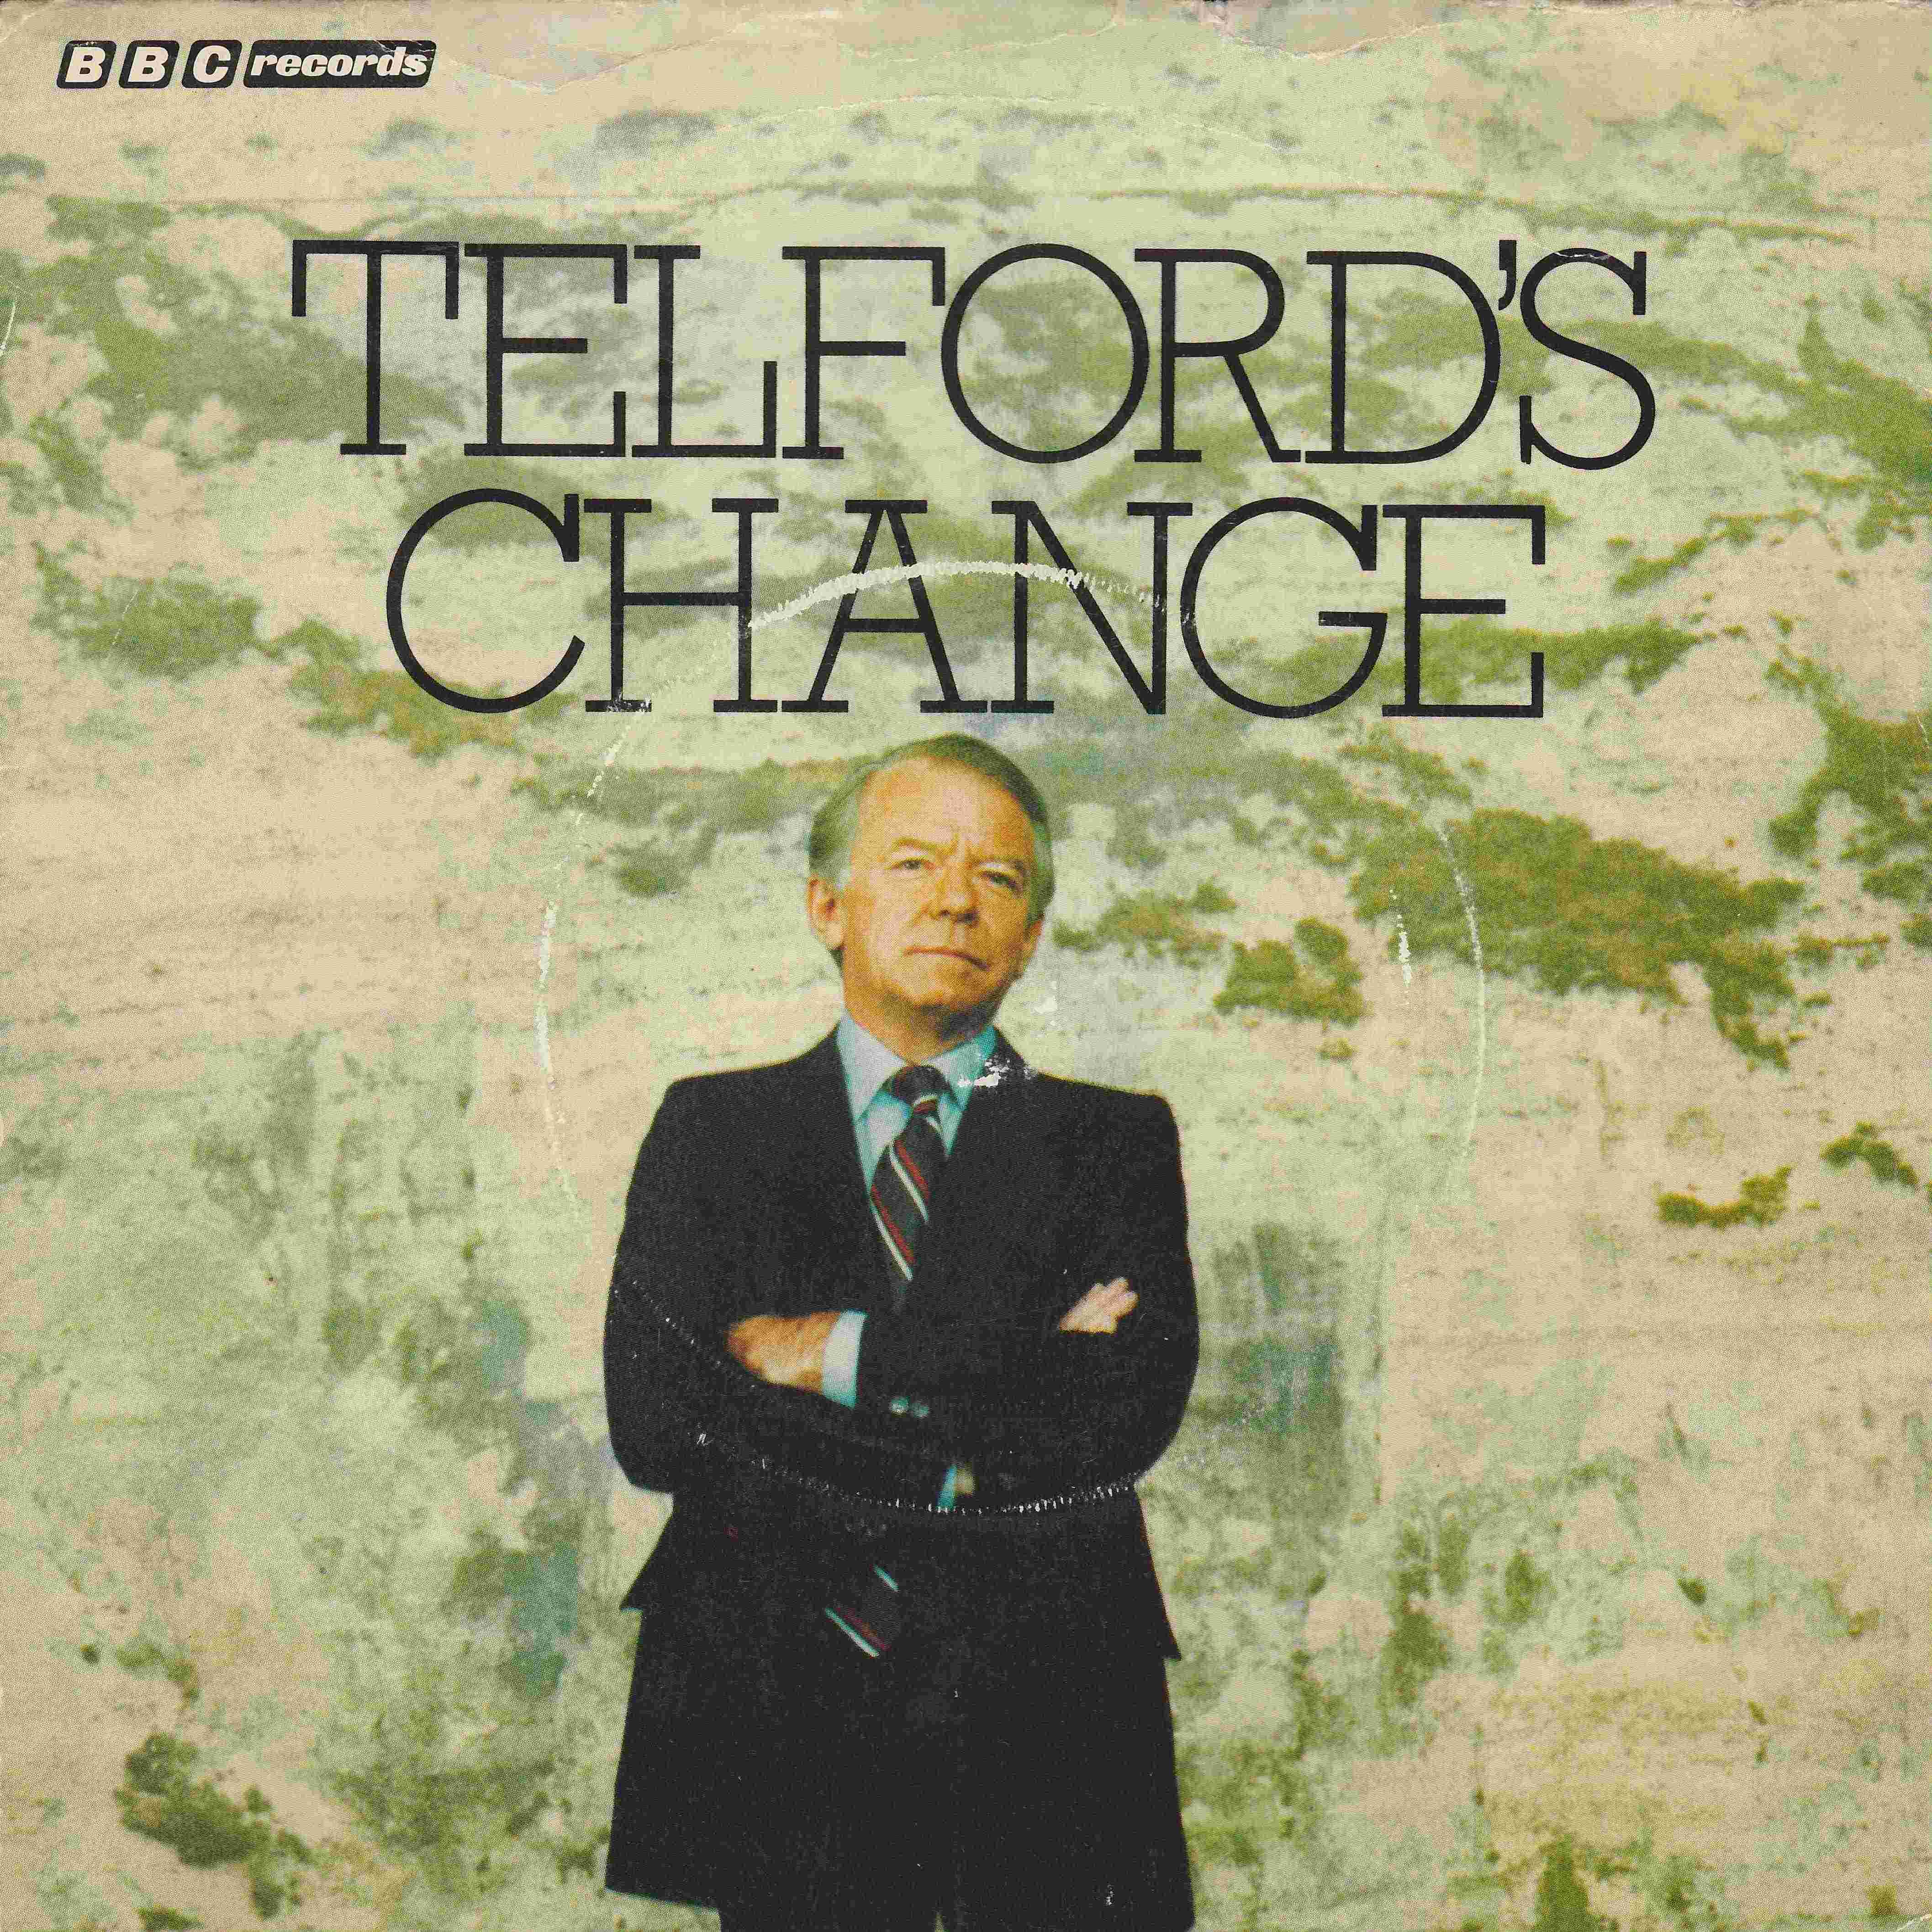 Picture of RESL 63 Telford's change by artist John Dankworth from the BBC singles - Records and Tapes library